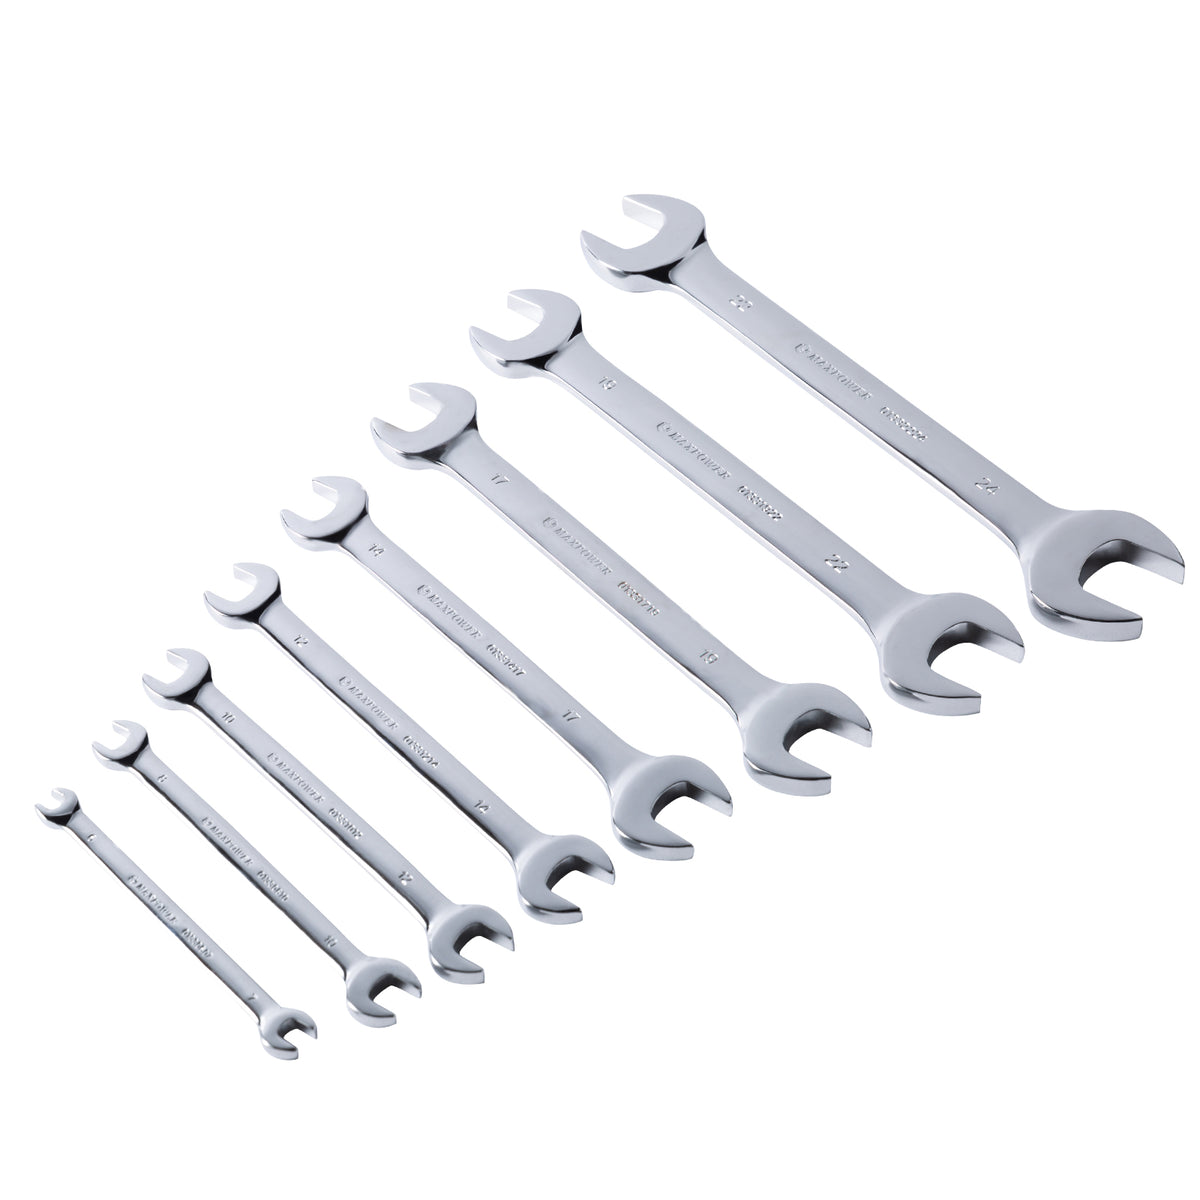 MAXPOWER 8pc Double Open-end Wrench Set (Metric up to 24mm) - Drop